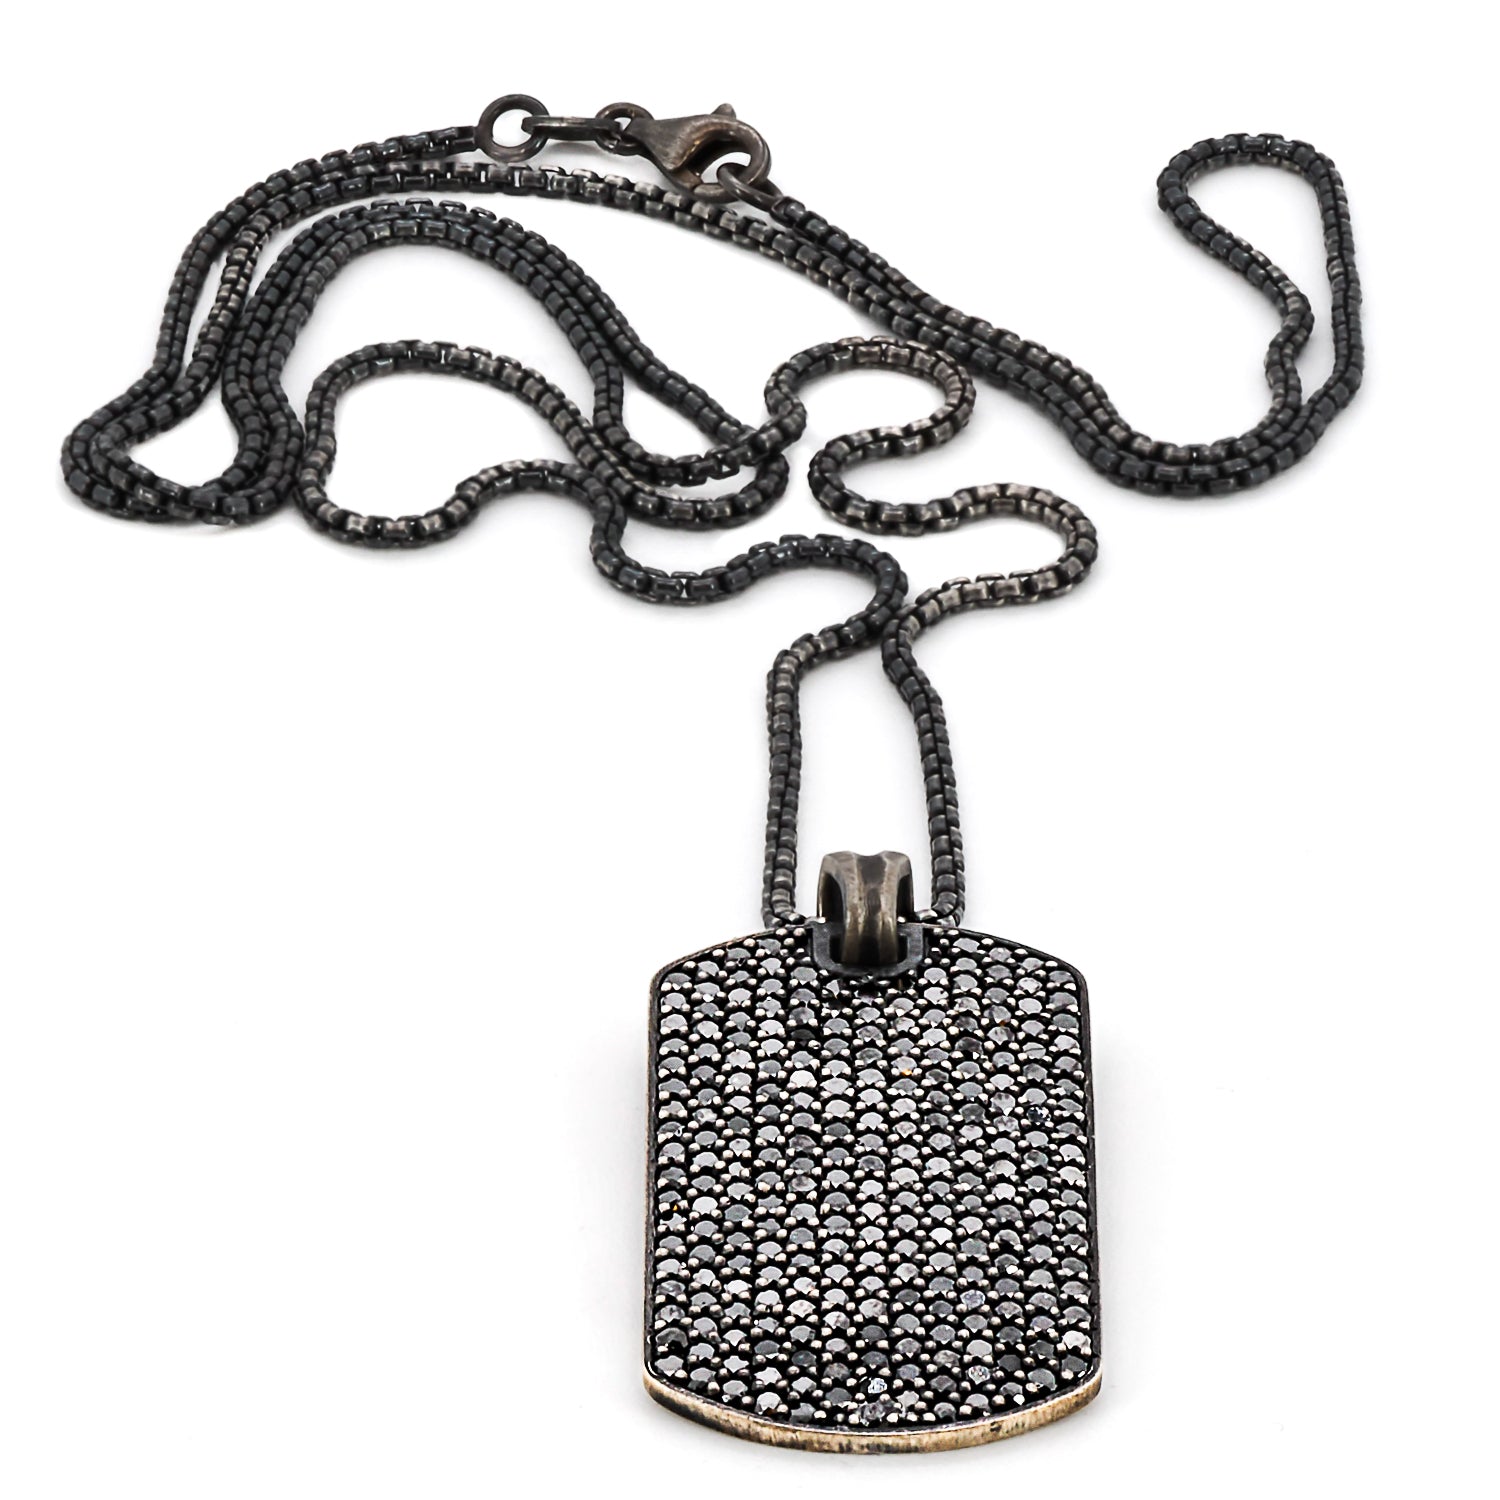 Top view of the stunning Dog Tag Black Diamond Necklace, highlighting the pendant's unique design and craftsmanship.